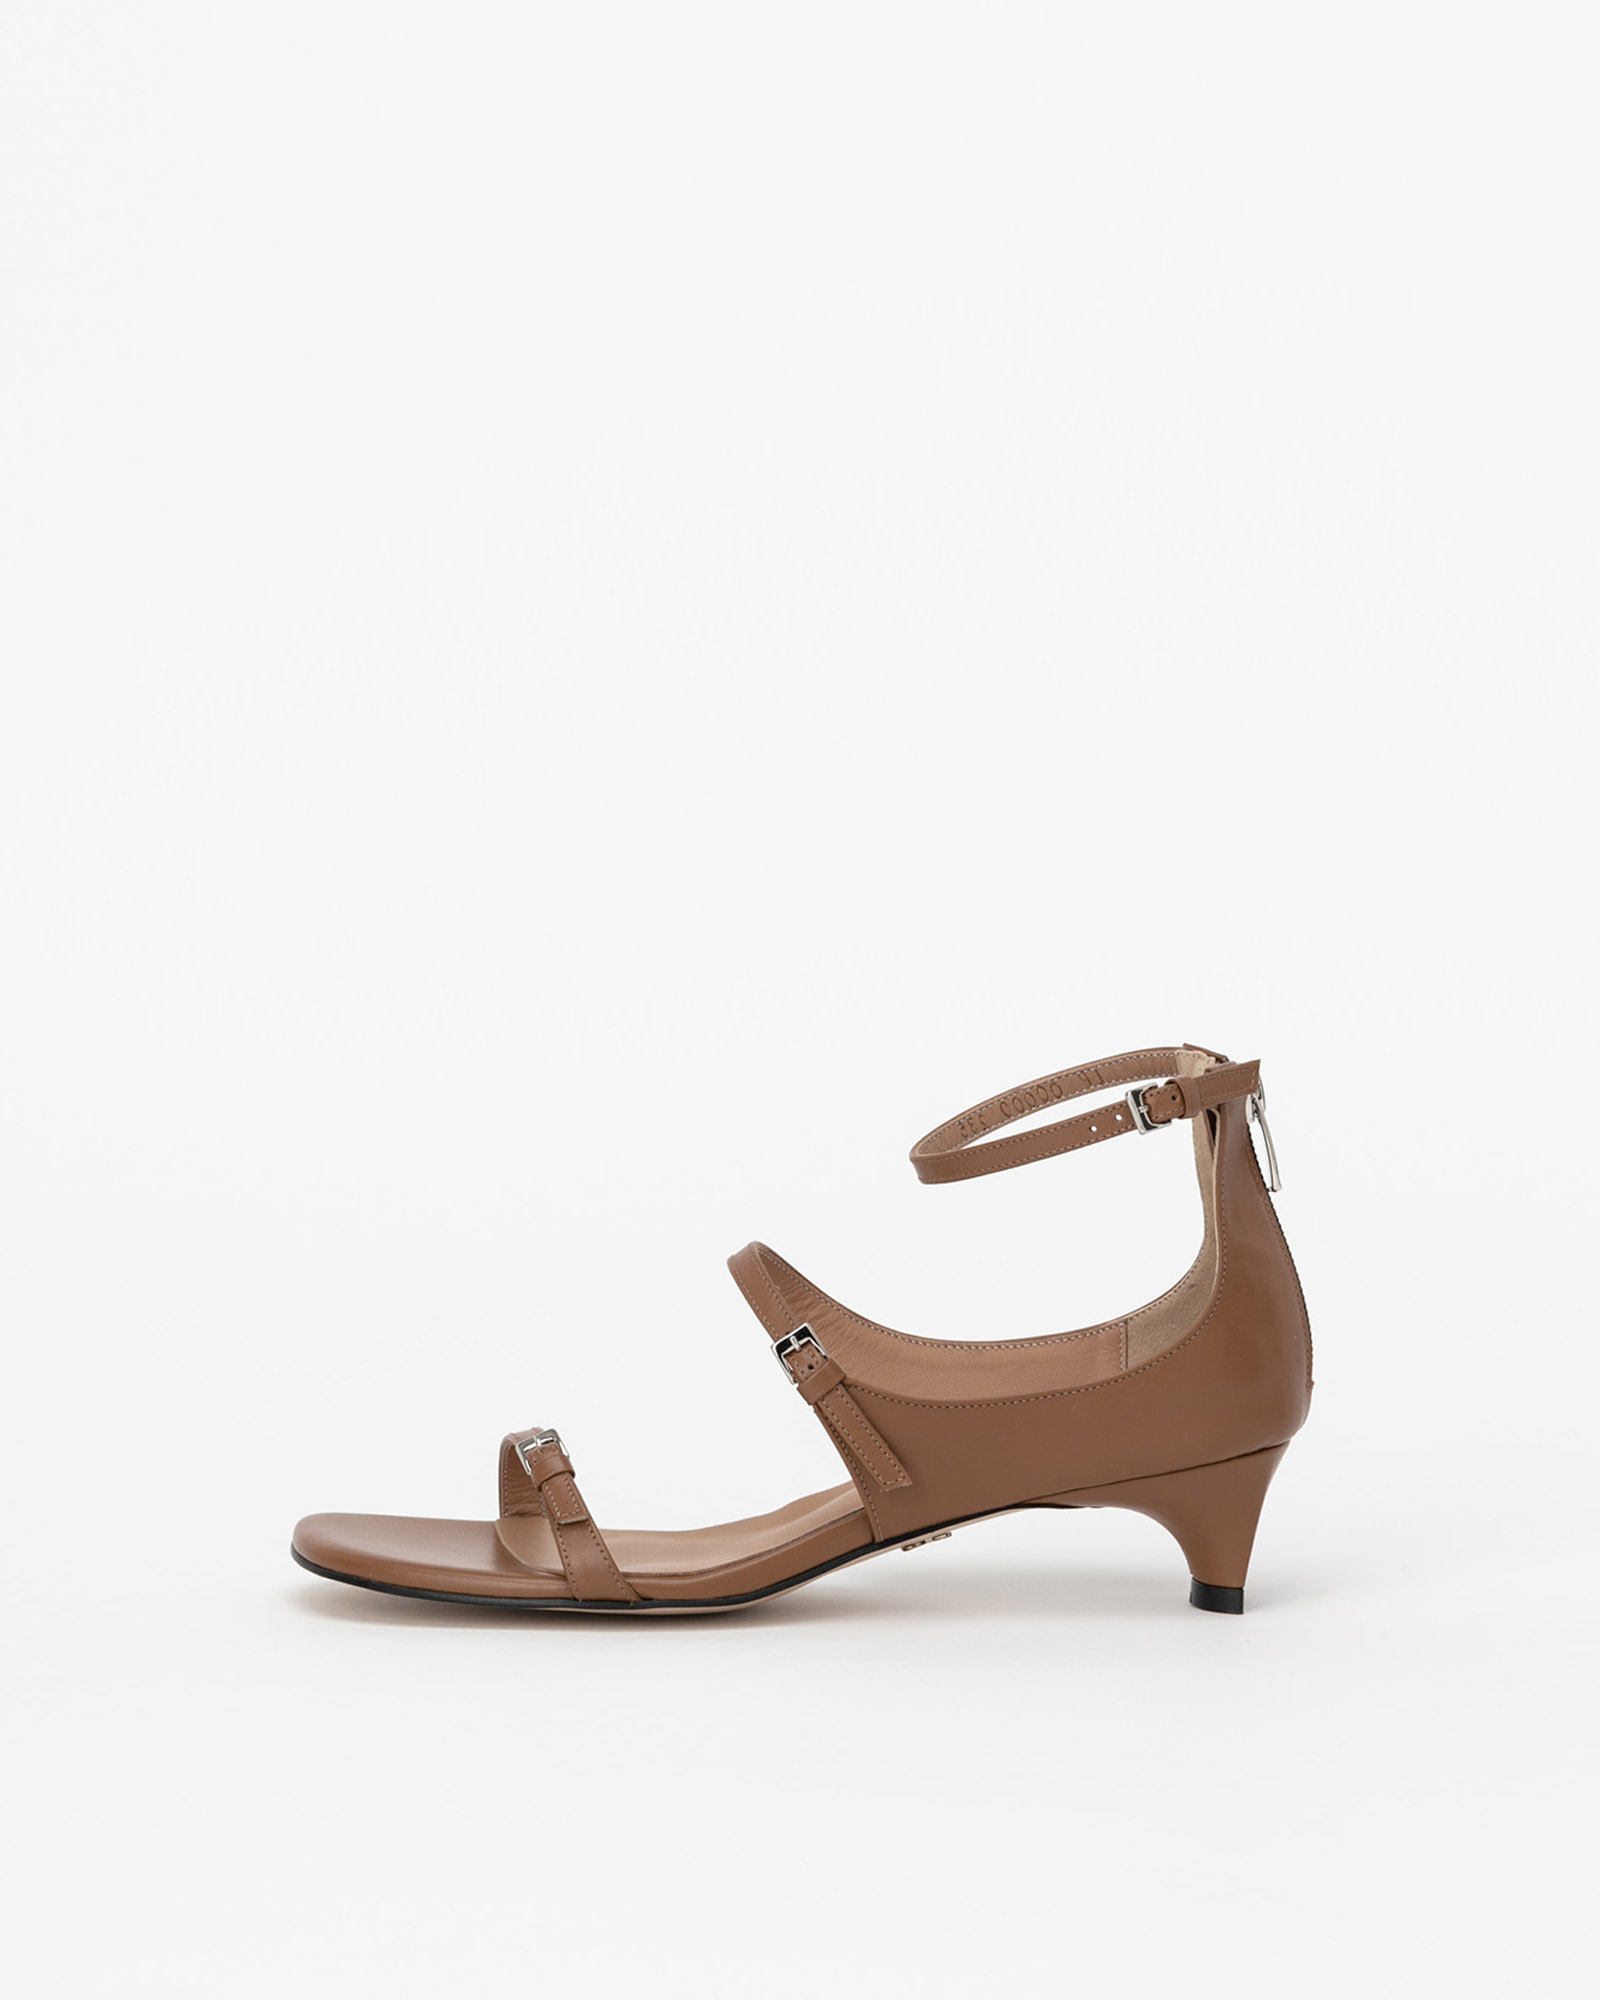 Trology Strap Sandals in Starfish Camel